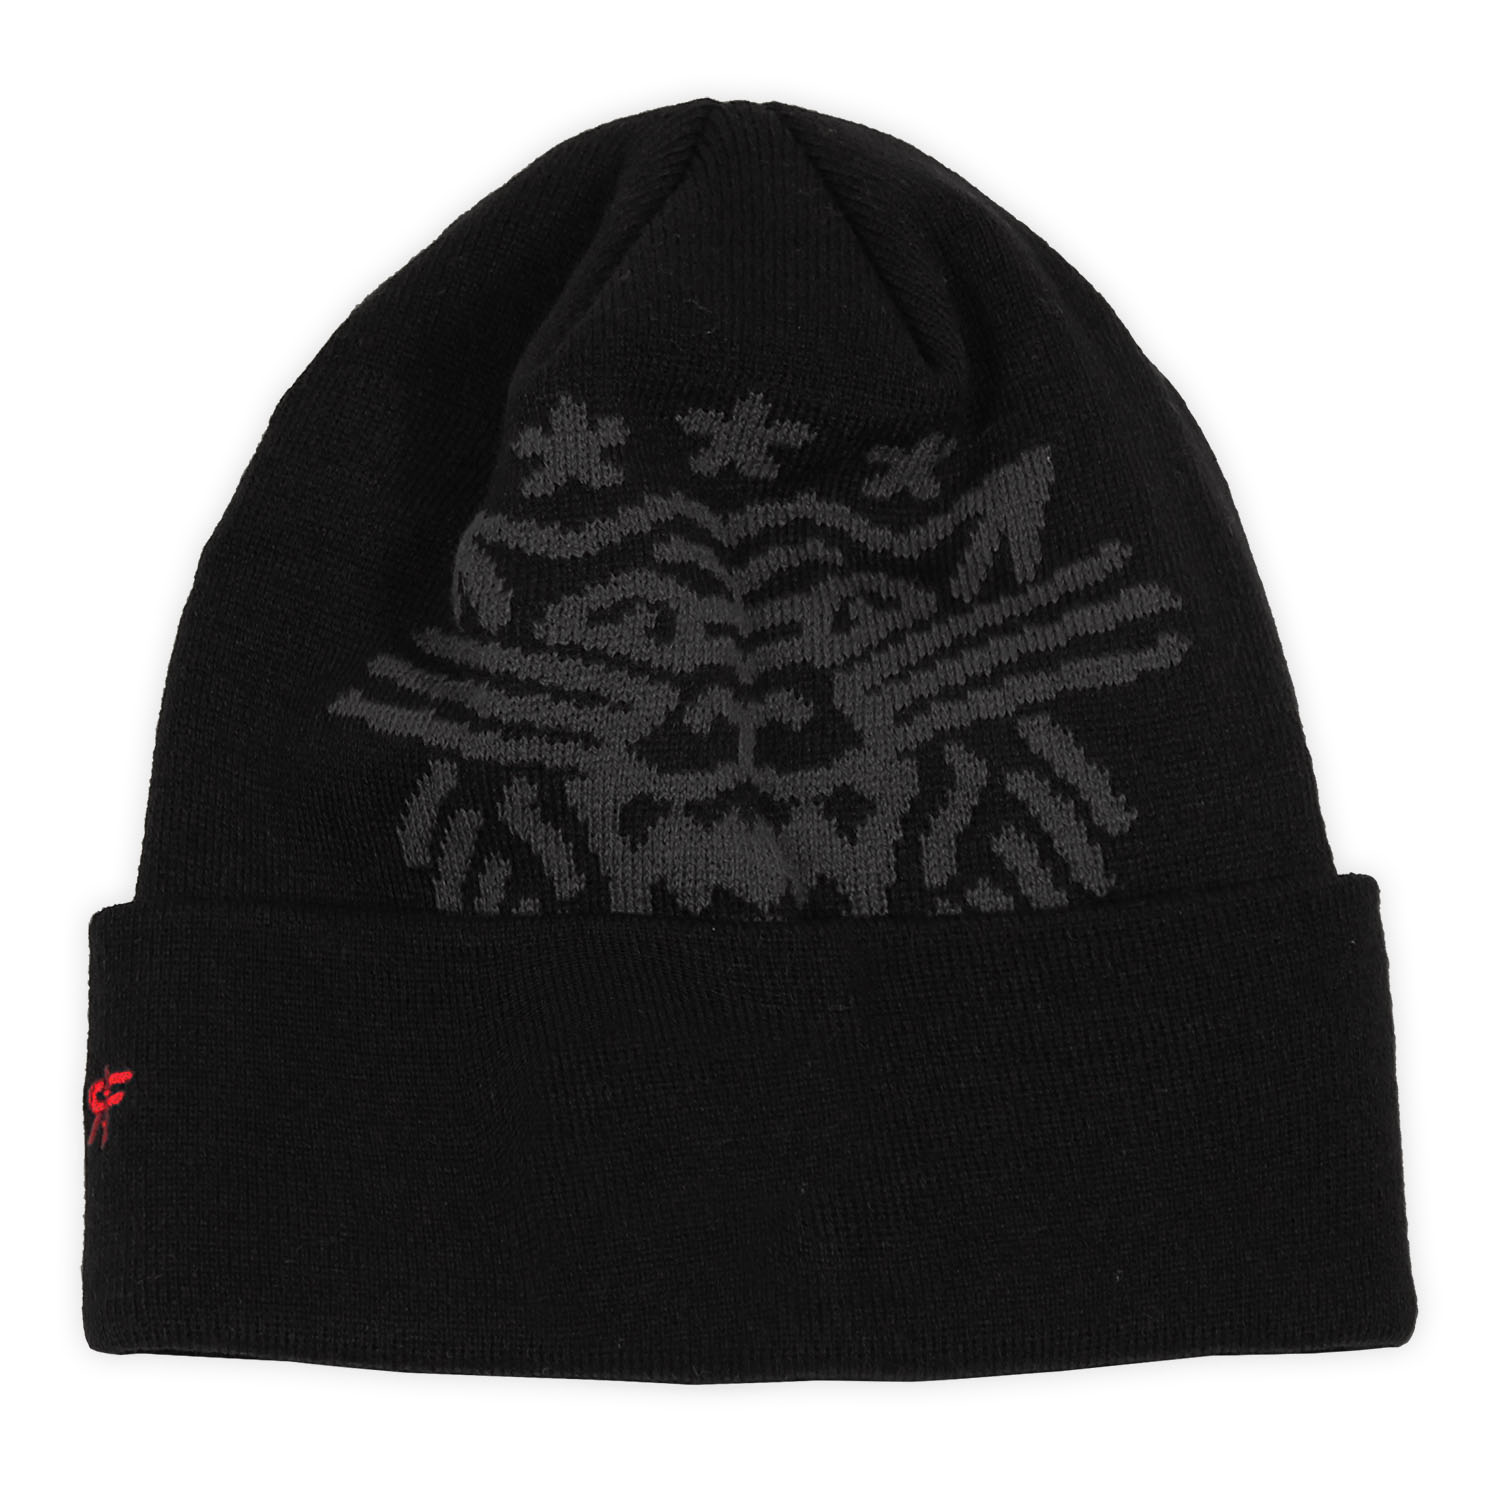 Stay Hungry Cuff Beanie